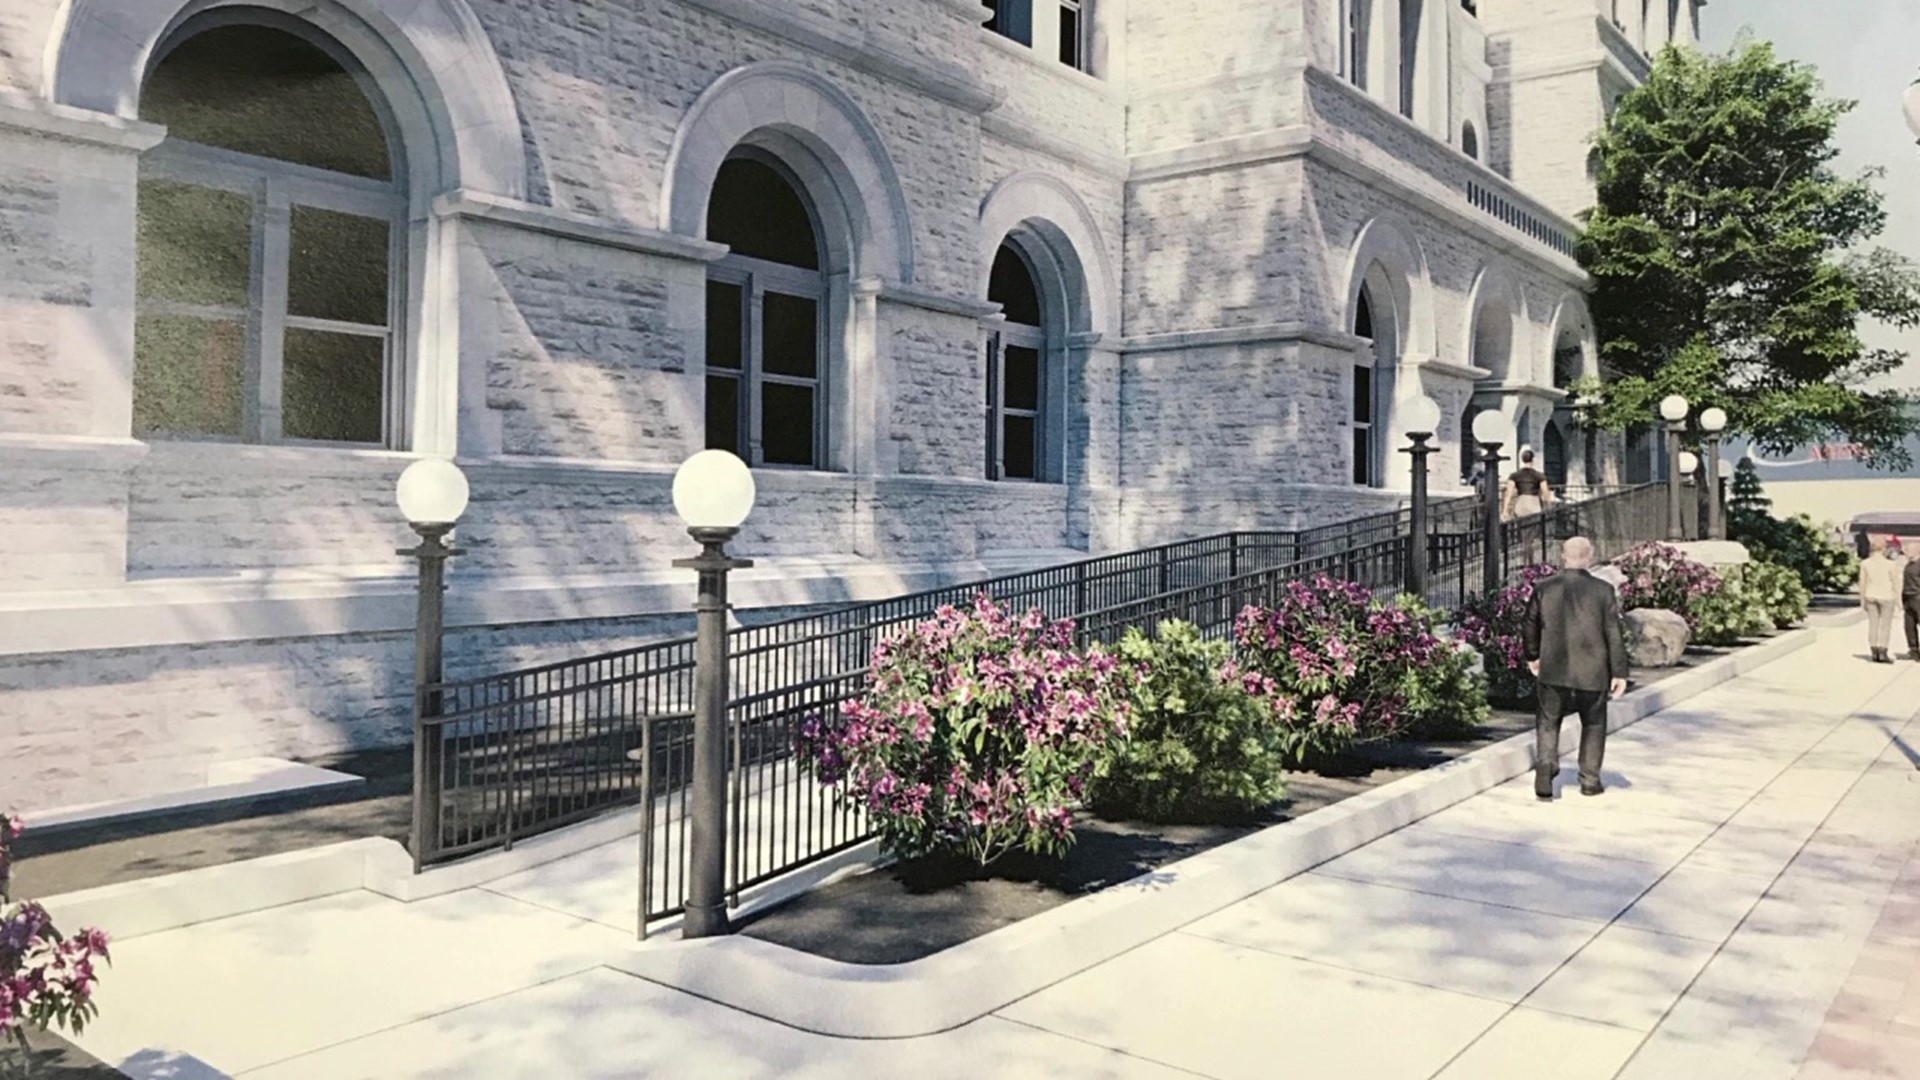 An ADA-accessible ramp is being installed this summer at City Hall in Billtown.